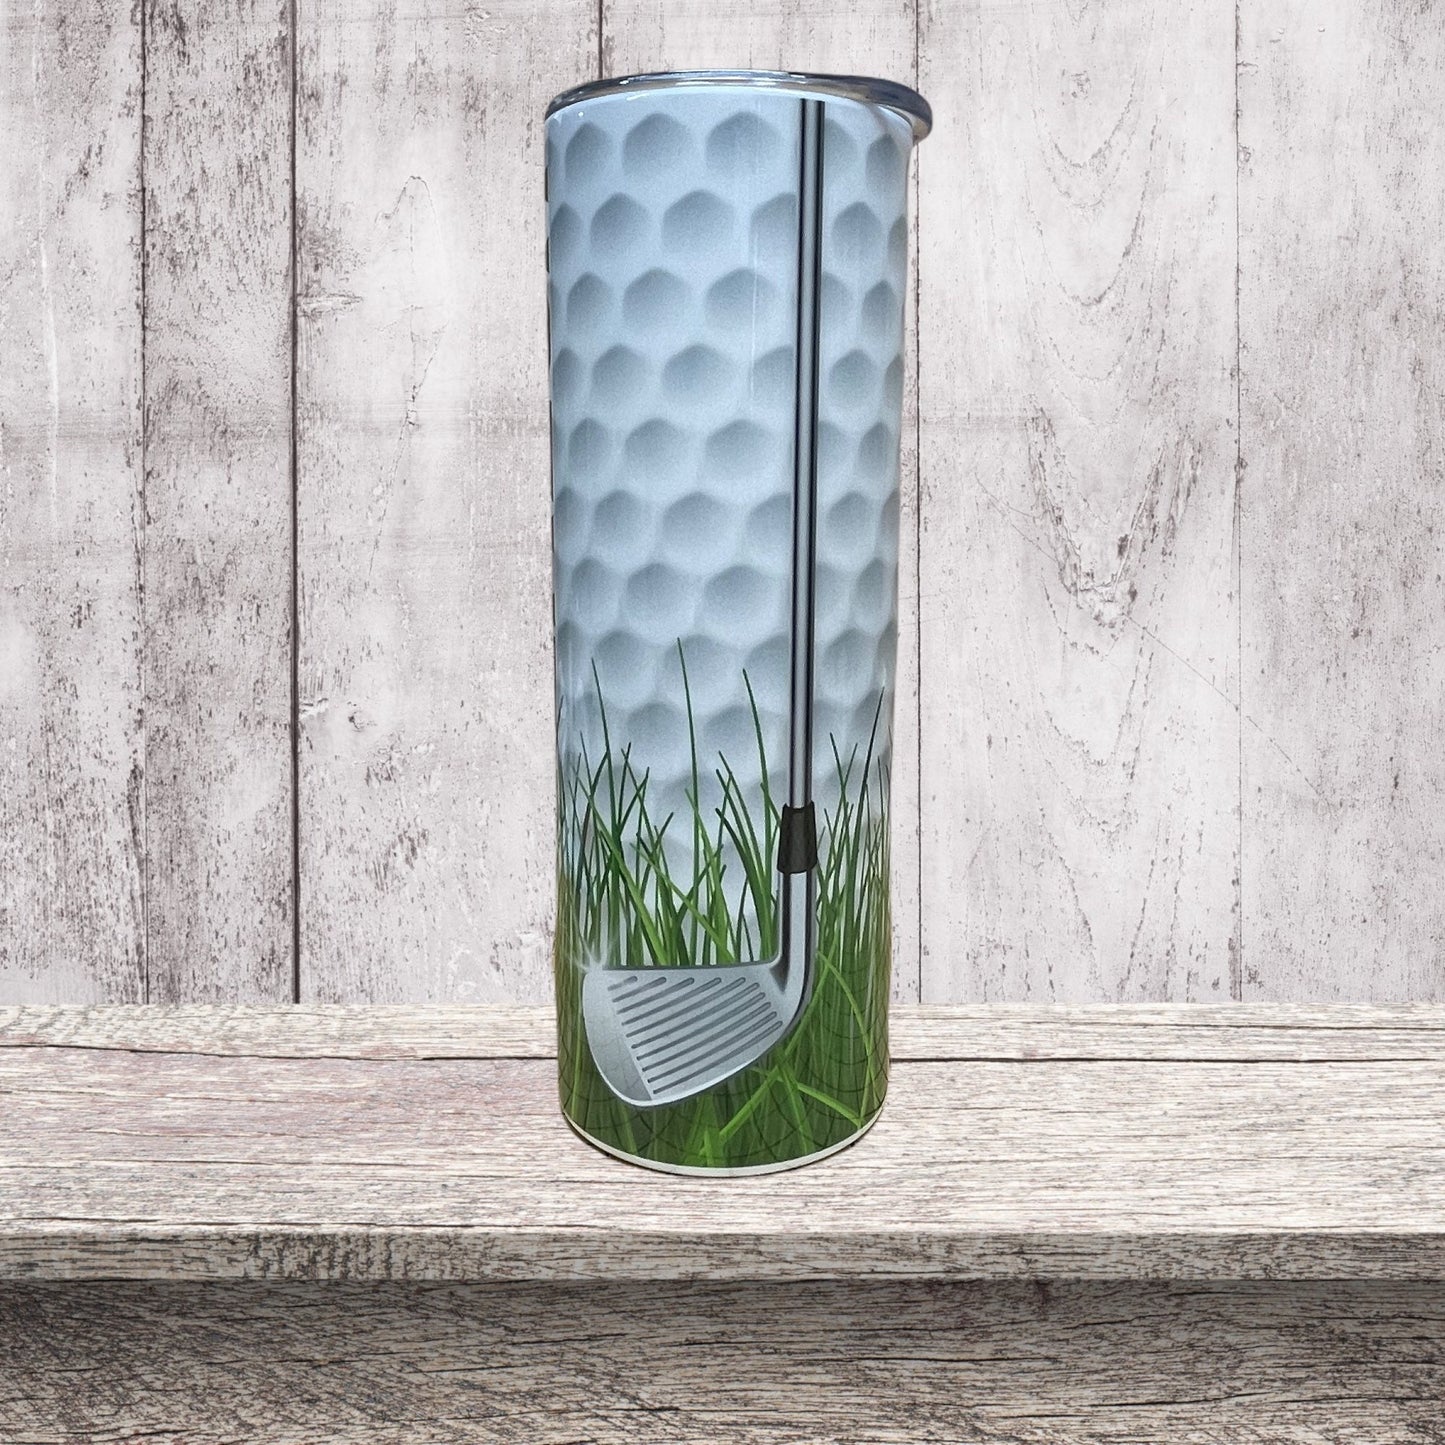 Golf clubs with personalized name tumbler